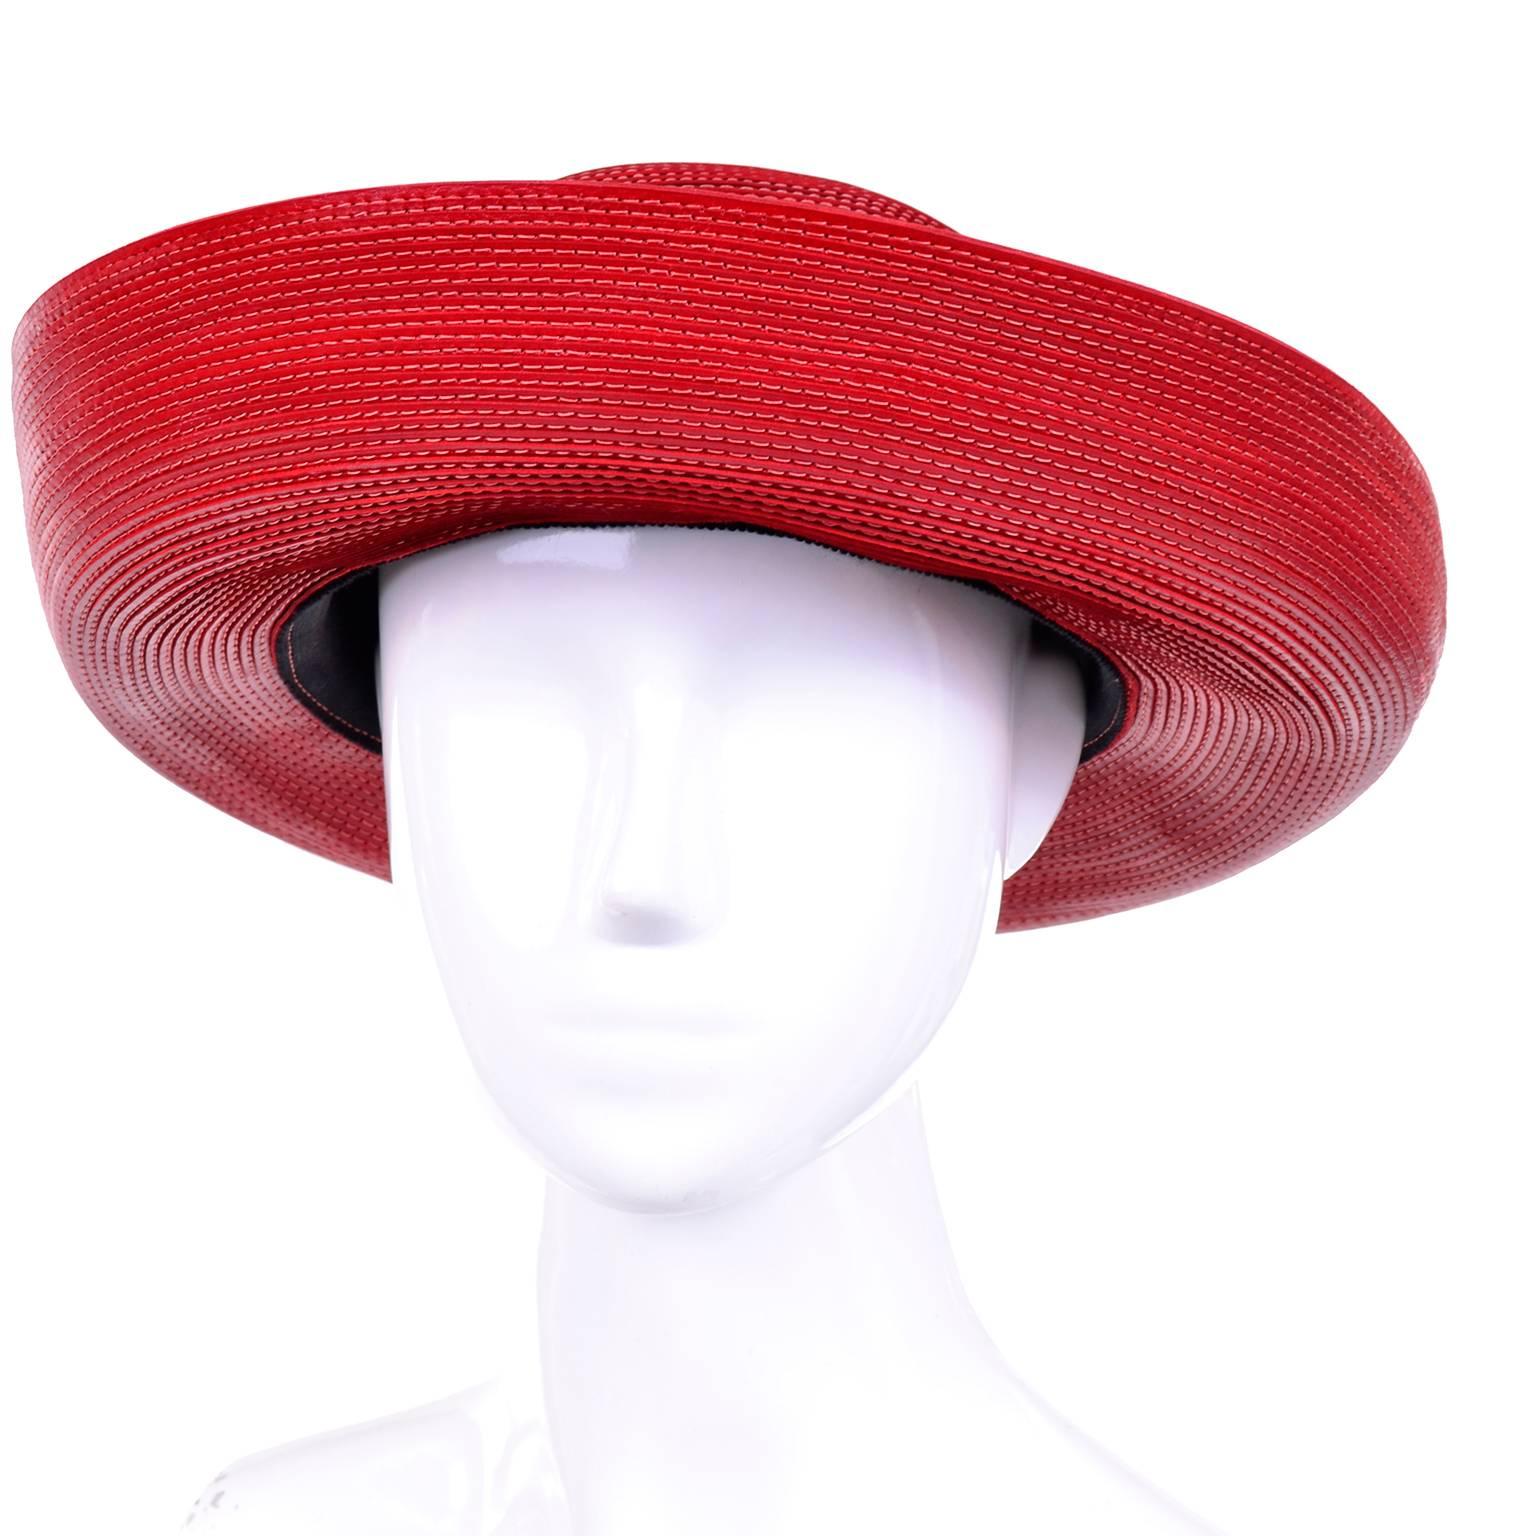 This is an absolutely gorgeous red leather vintage Patricia Underwood hat with rows and rows of micro top stitching. This fabulous hat has a 4